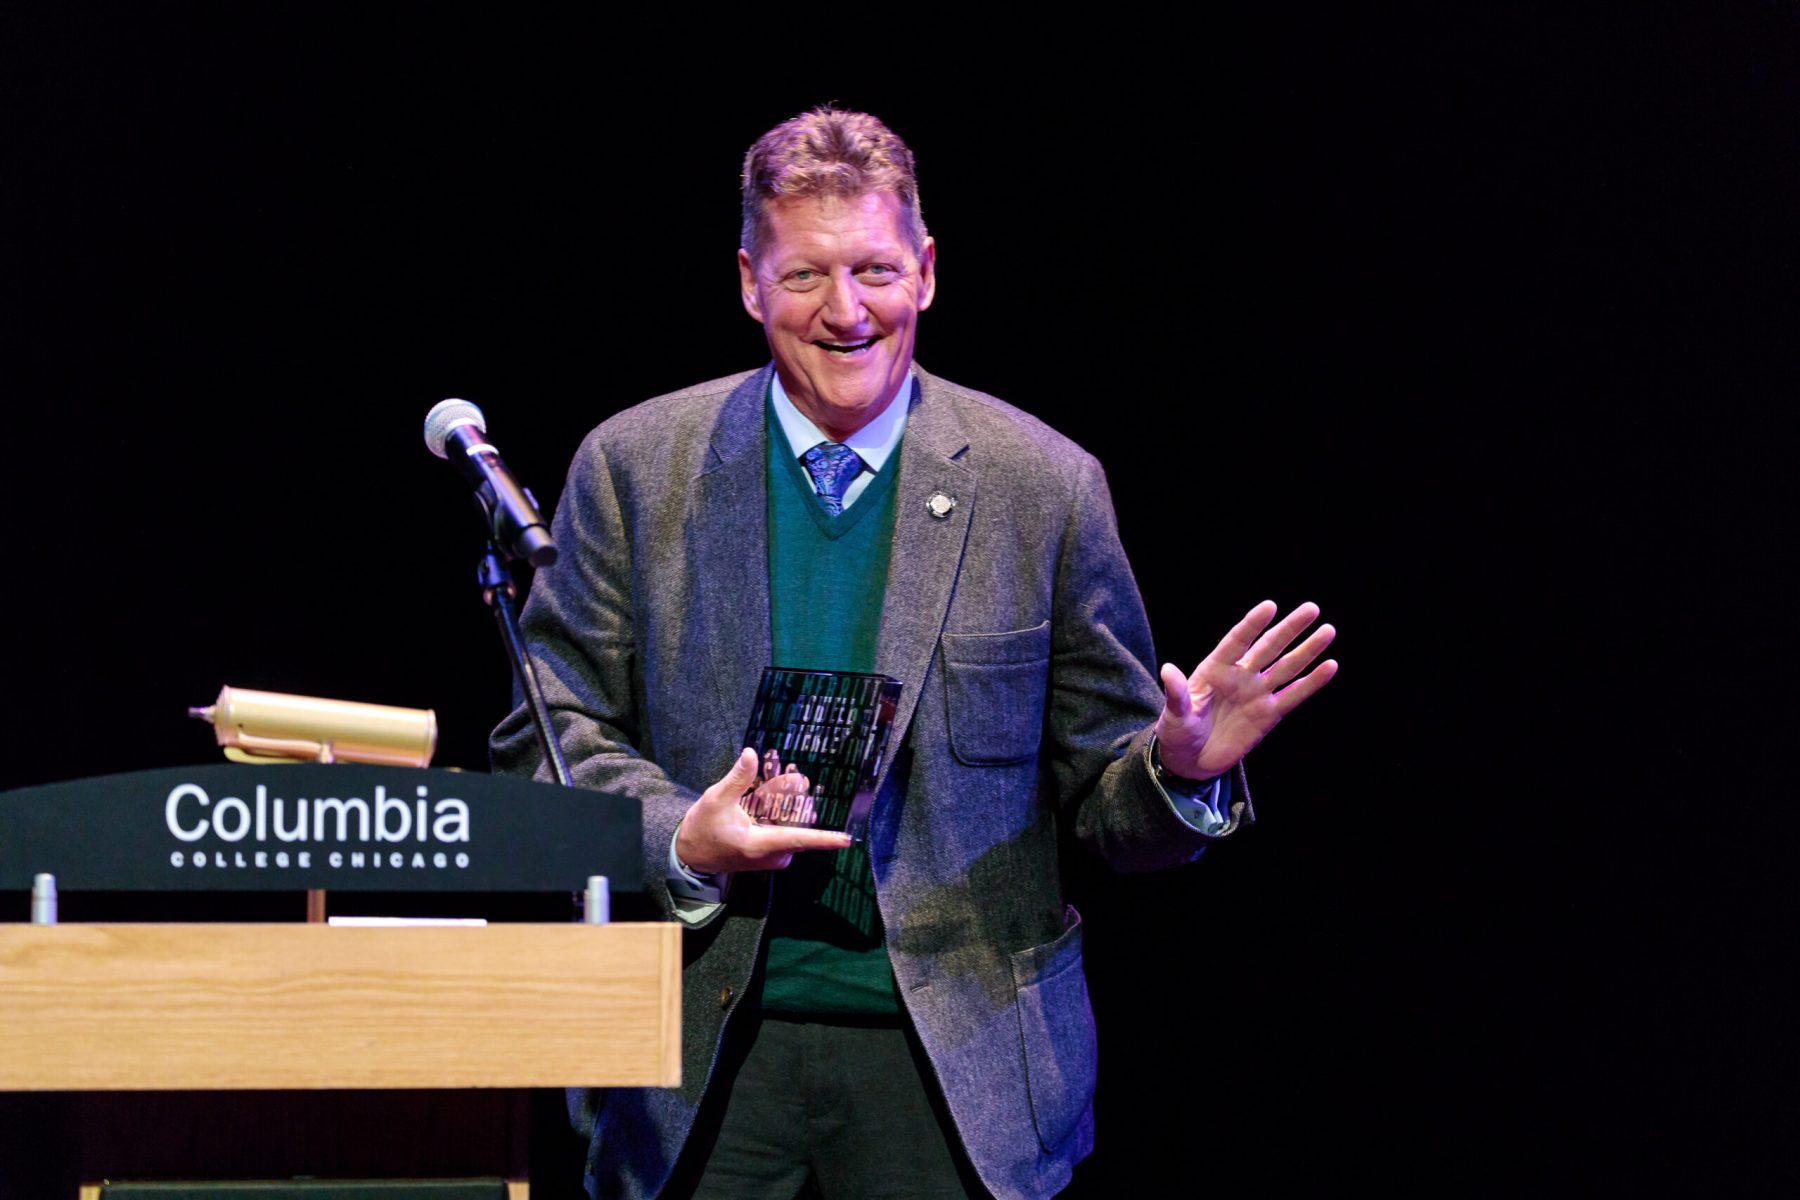 The 2019 Michael Merritt Awards and Design Exposition at Columbia College Chicago May13, 2019. (Photo by John Zich)